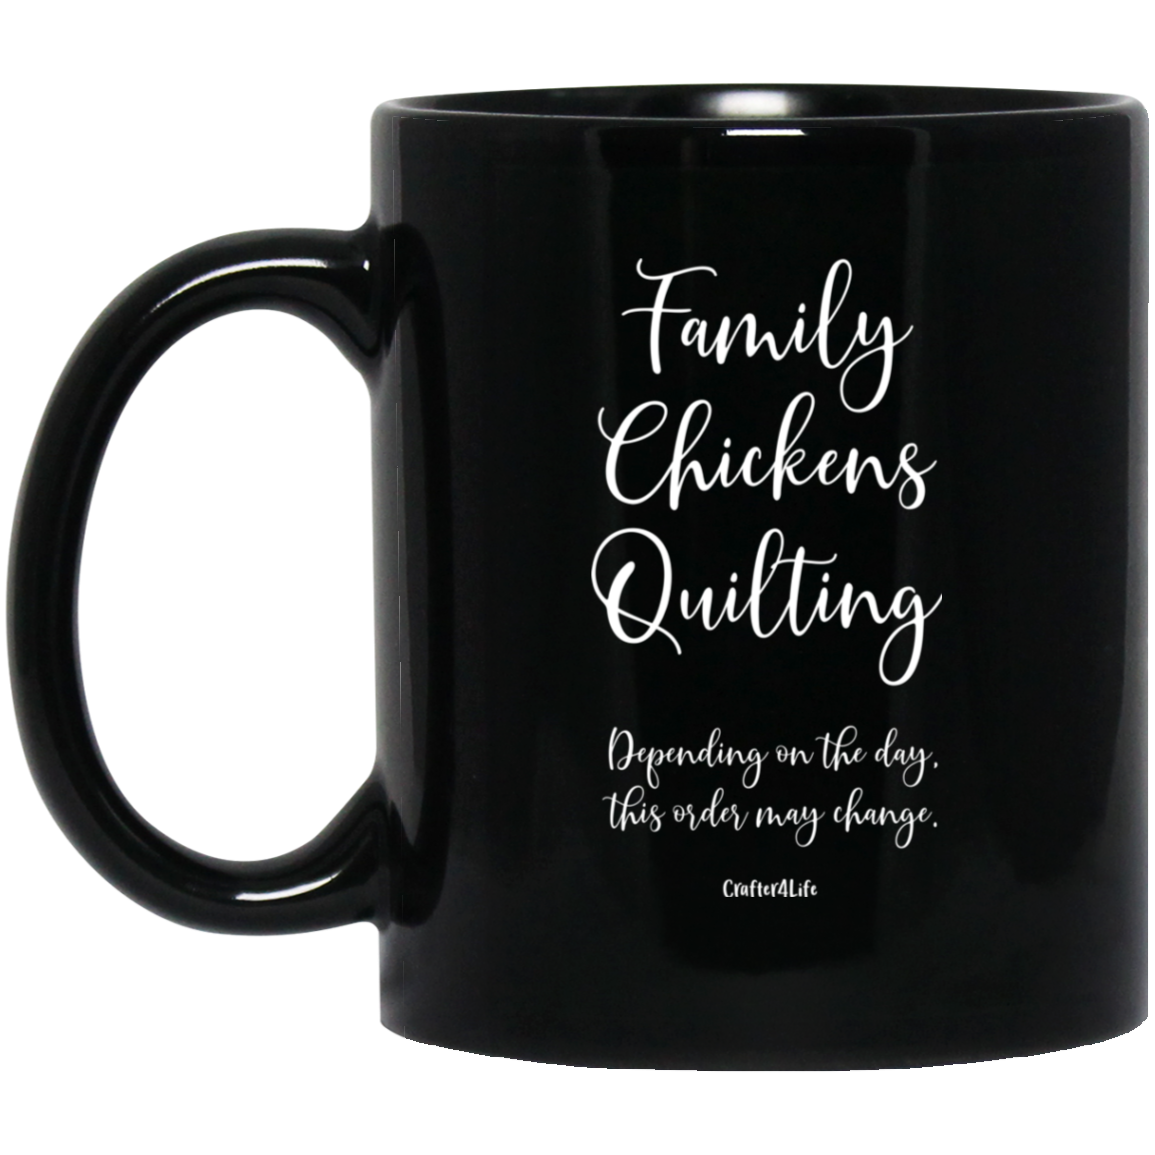 Family-Chickens-Quilting Black Mugs